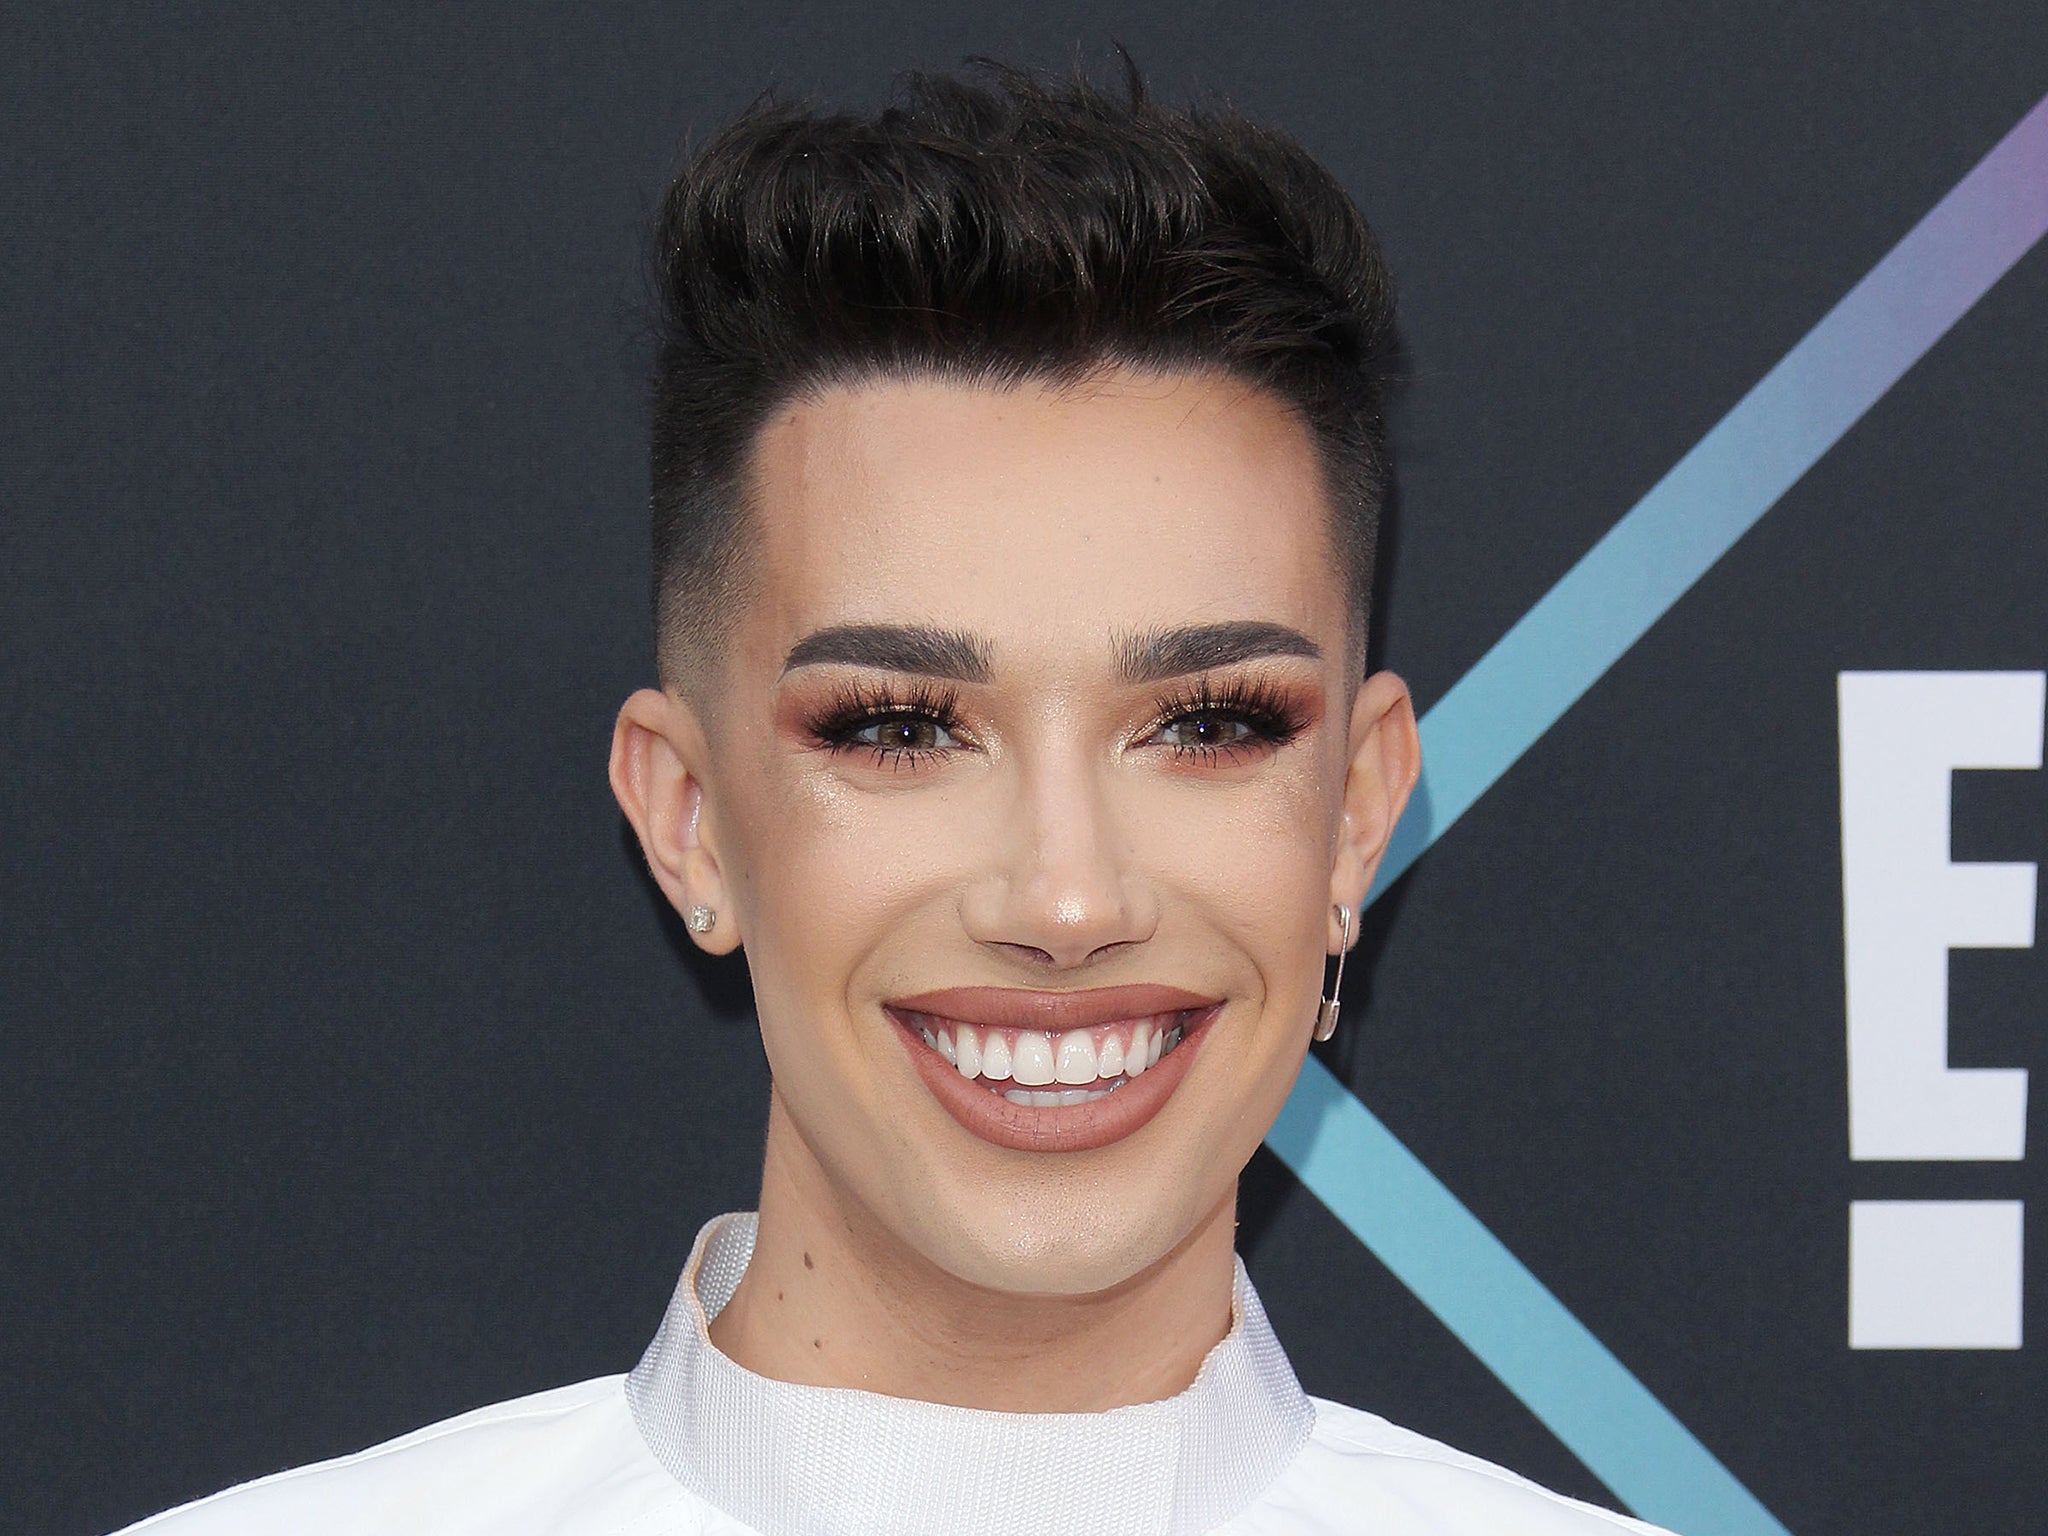 James Charles: The making and 'cancelling' of a YouTube superstar...